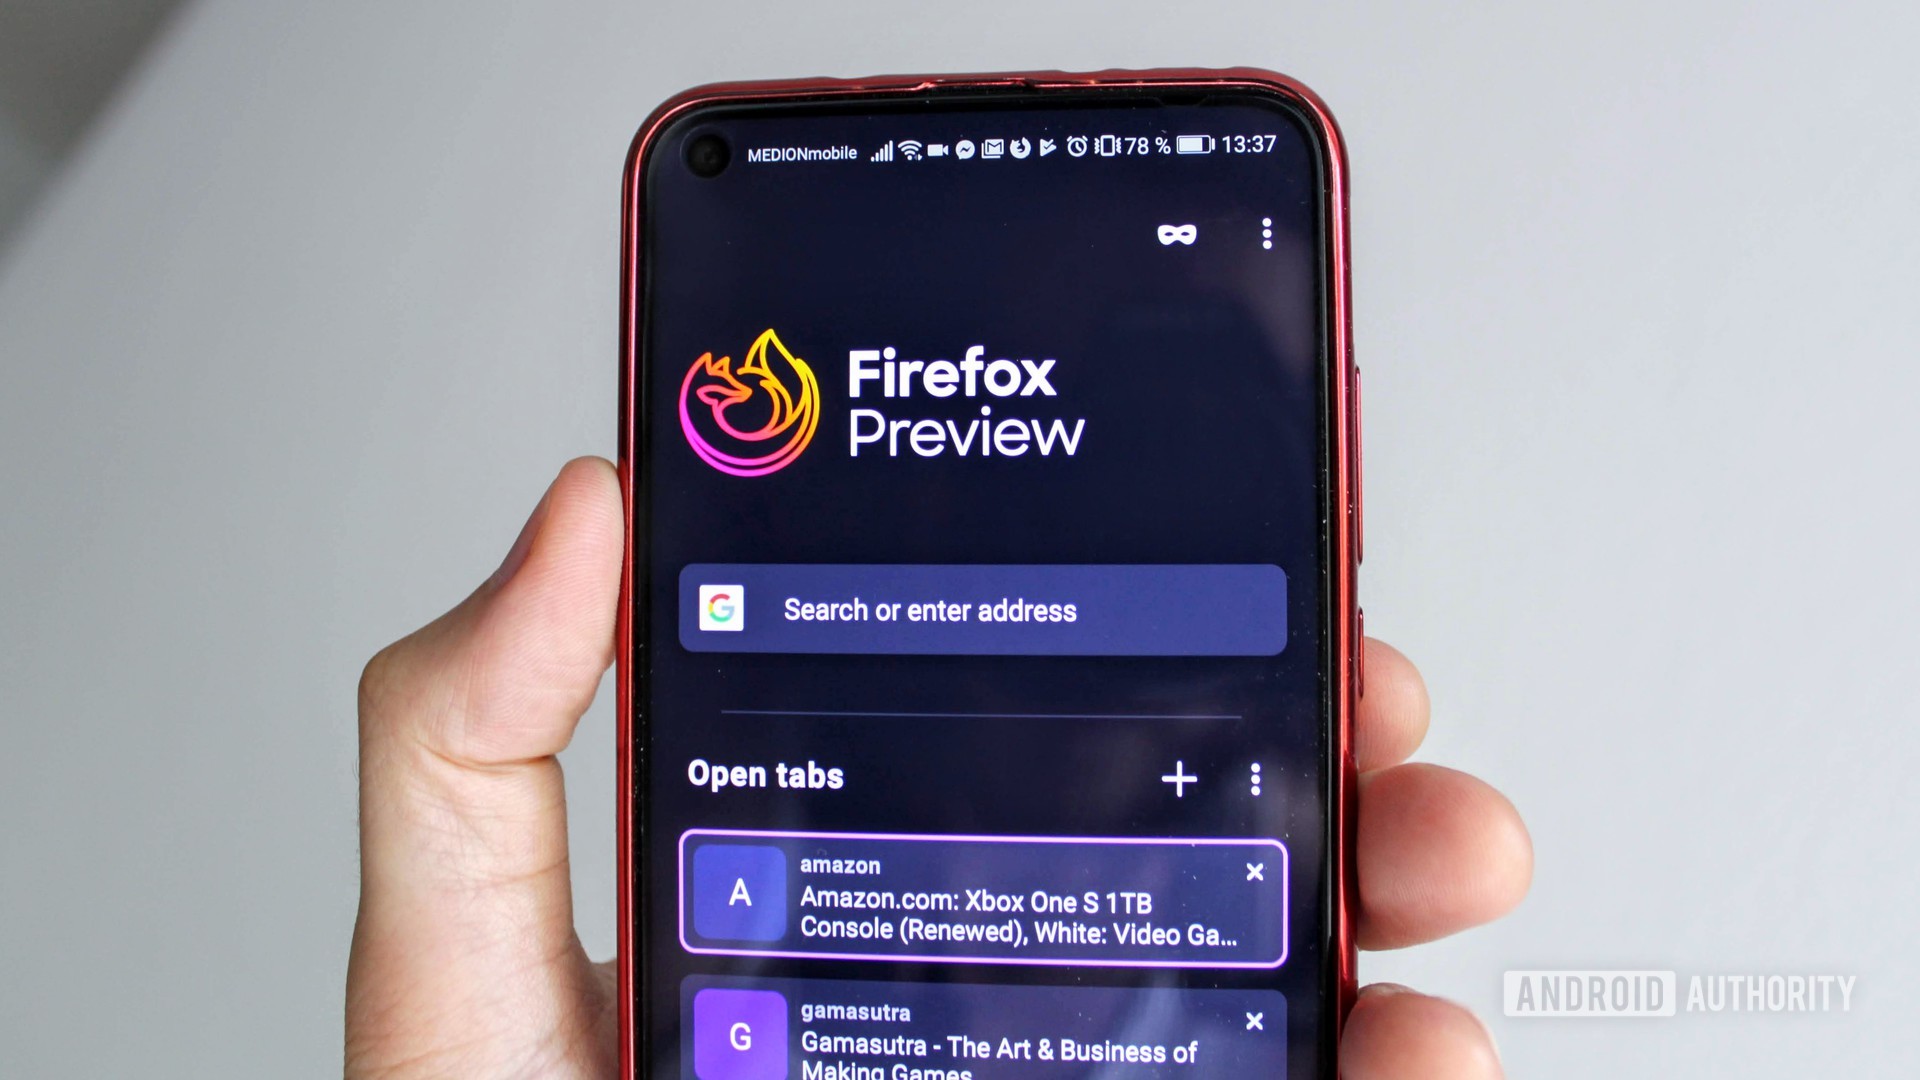 Mozilla Firefox Preview for Android: A deeper look - Android Authority